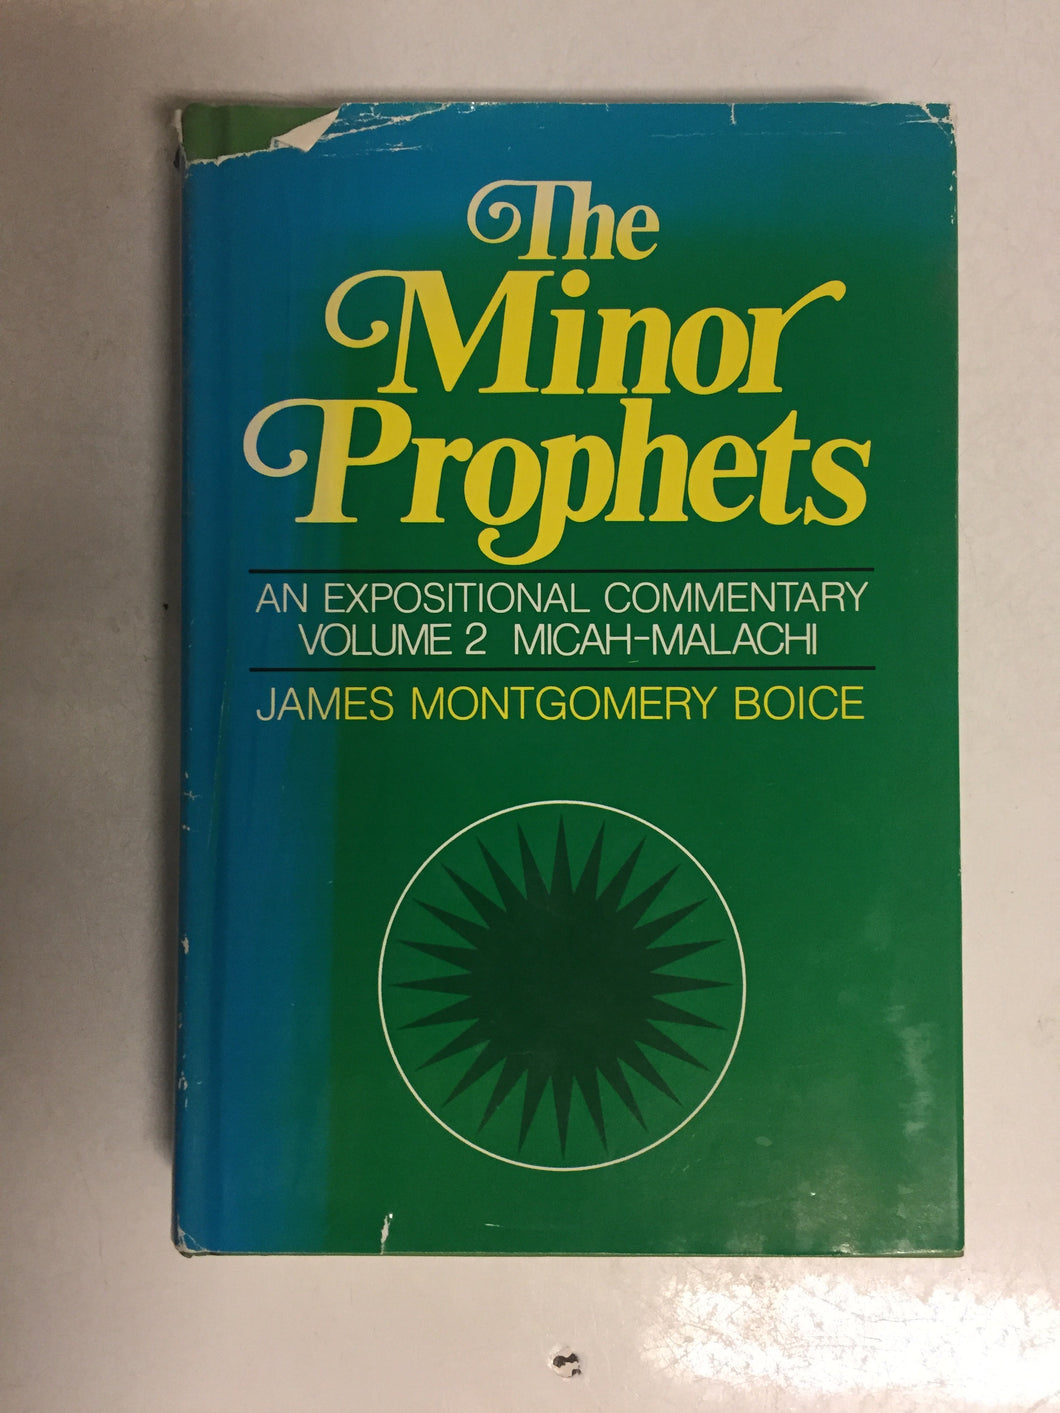 The Minor Prophets An Expositional Commentary Volume 2 Micah-Malachi - Slickcatbooks